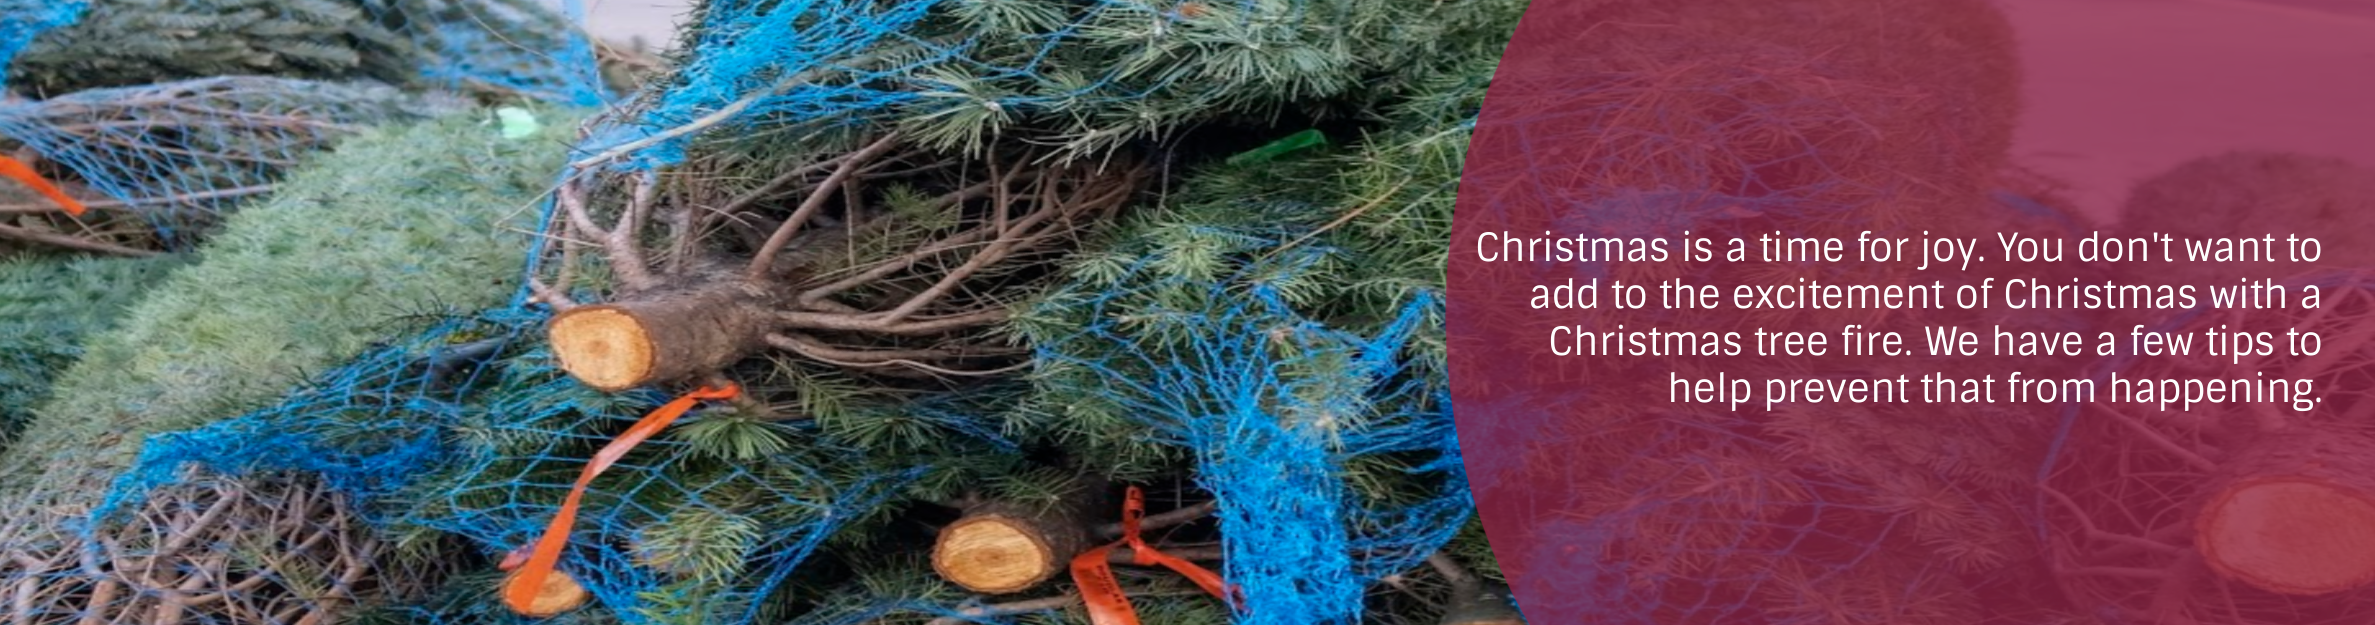 Christmas is a time for joy. You don't want to add to the excitement of Christmas with a Christmas tree fire. We have a few tips to help prevent that from happening.